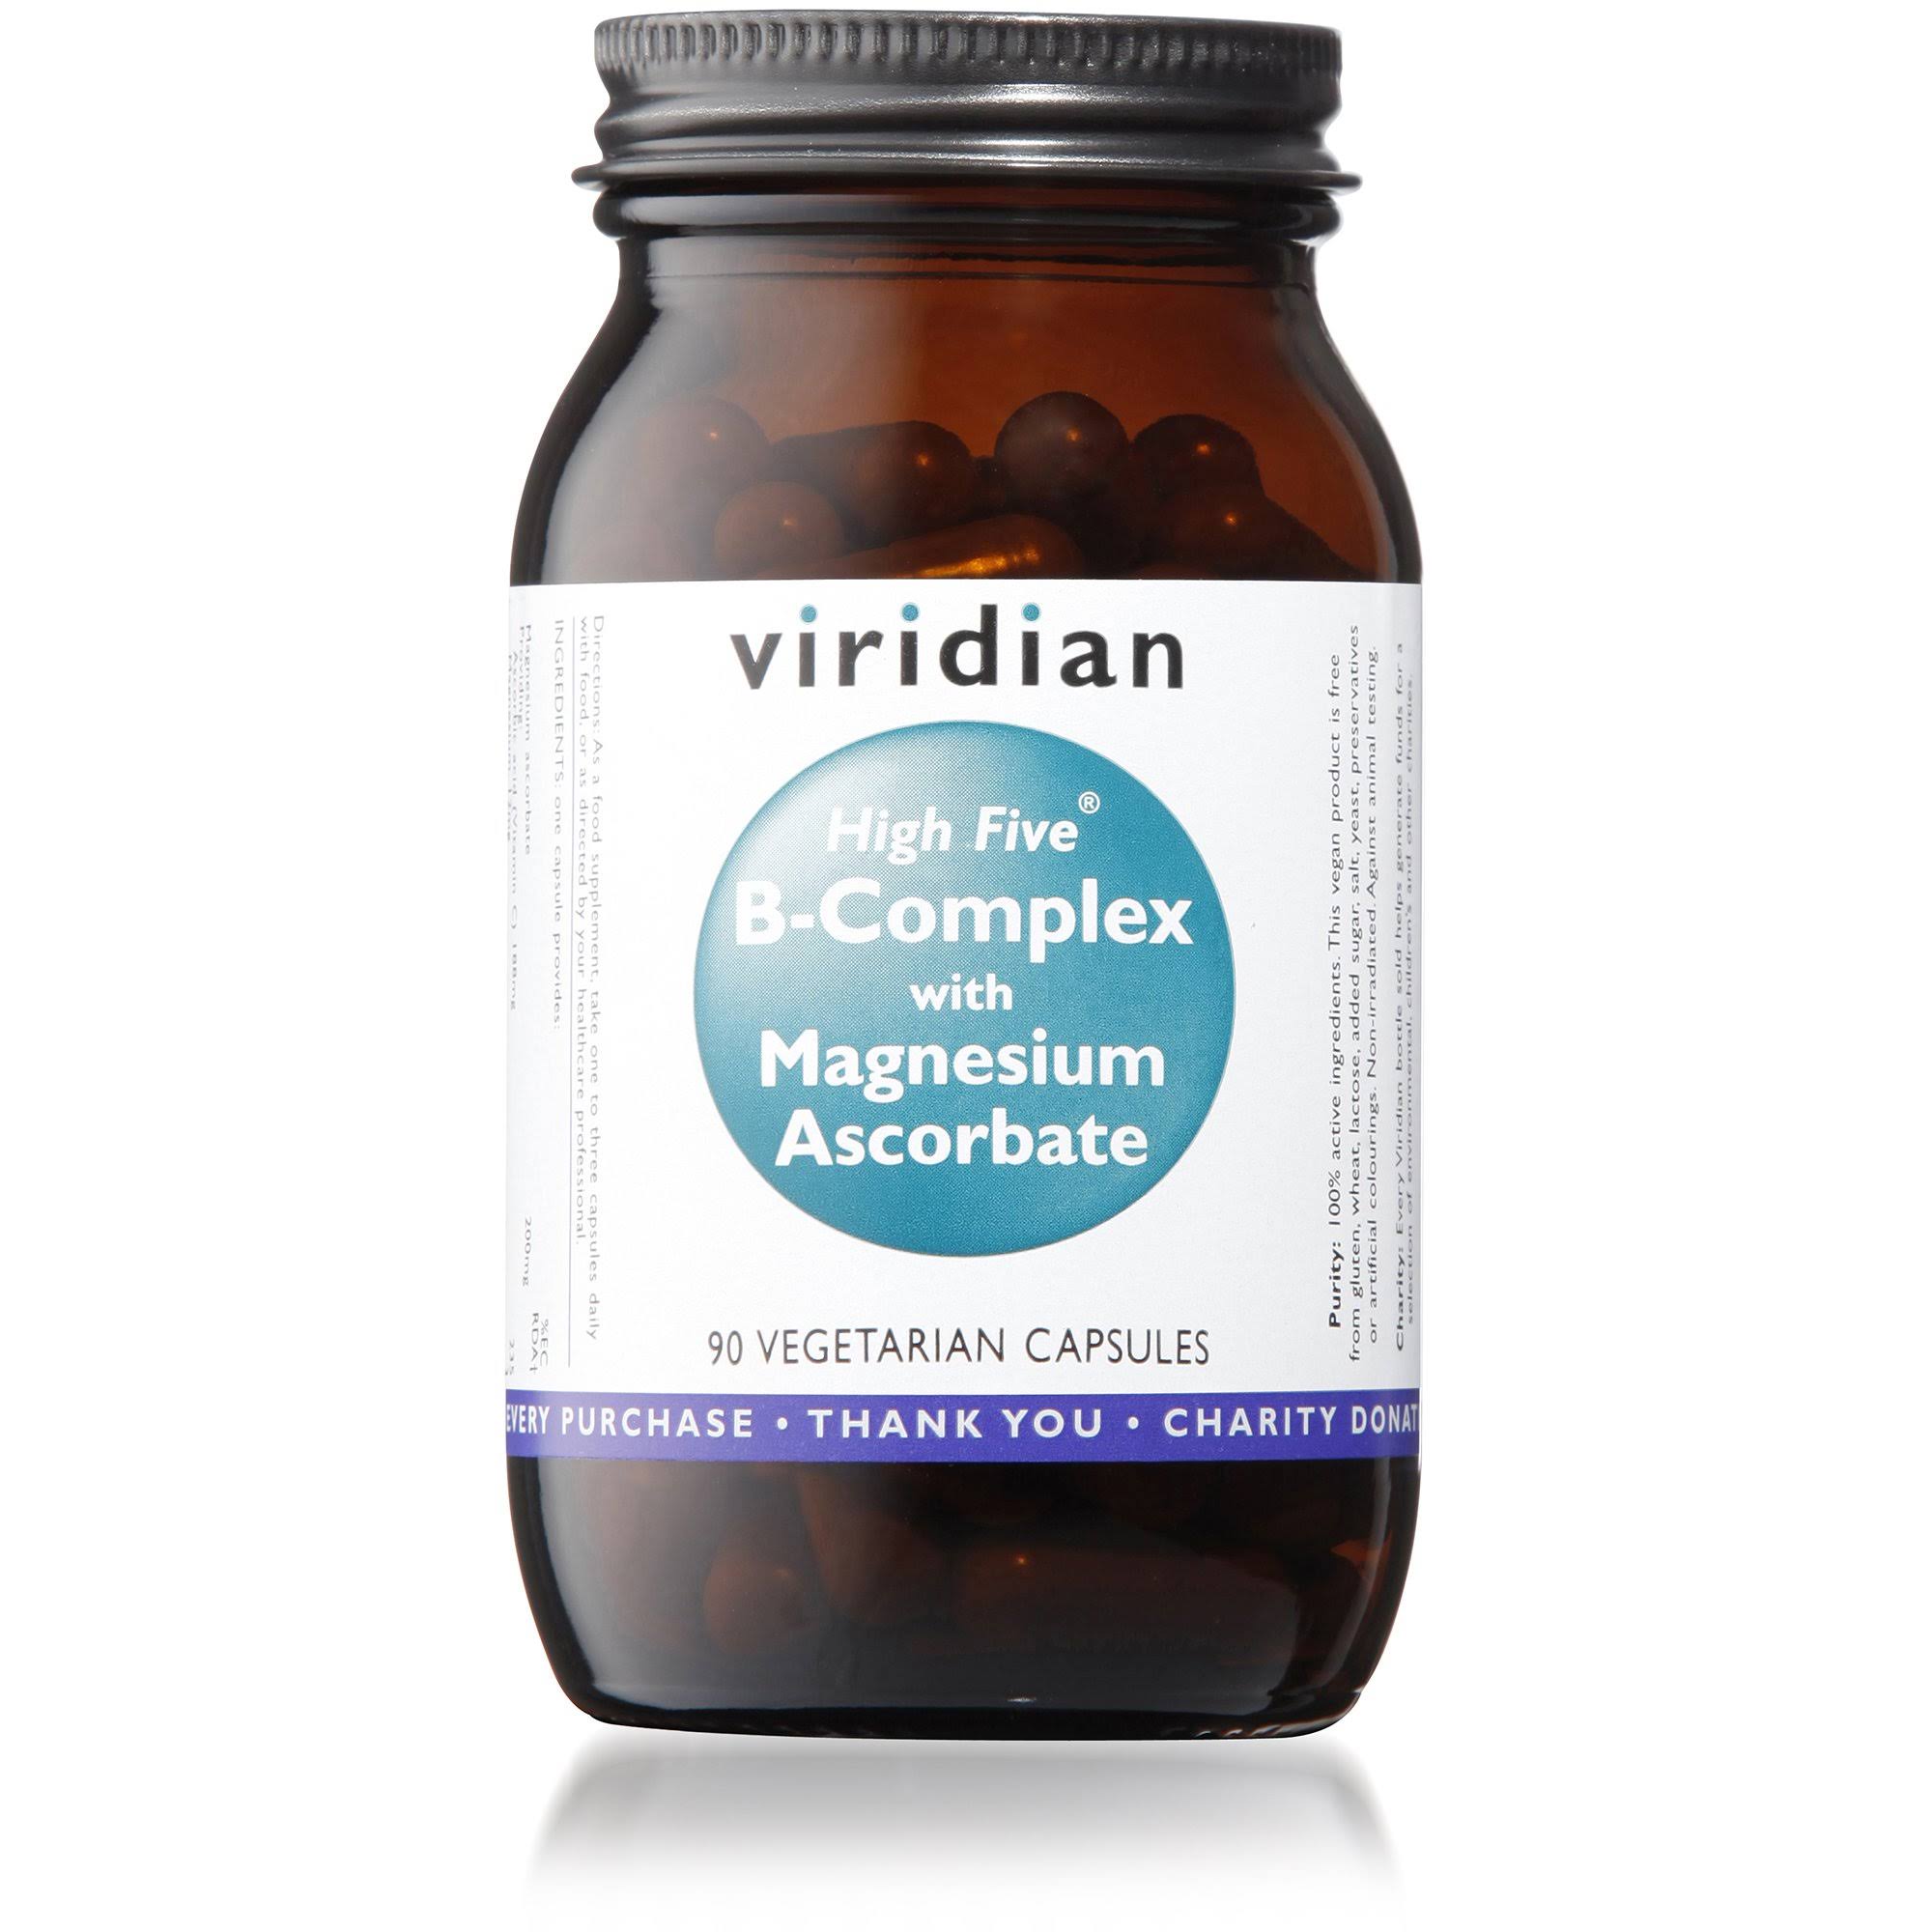 Viridian High Five B-Complex with Magnesium Ascorbate Supplement - 90 Vegetable Capsule